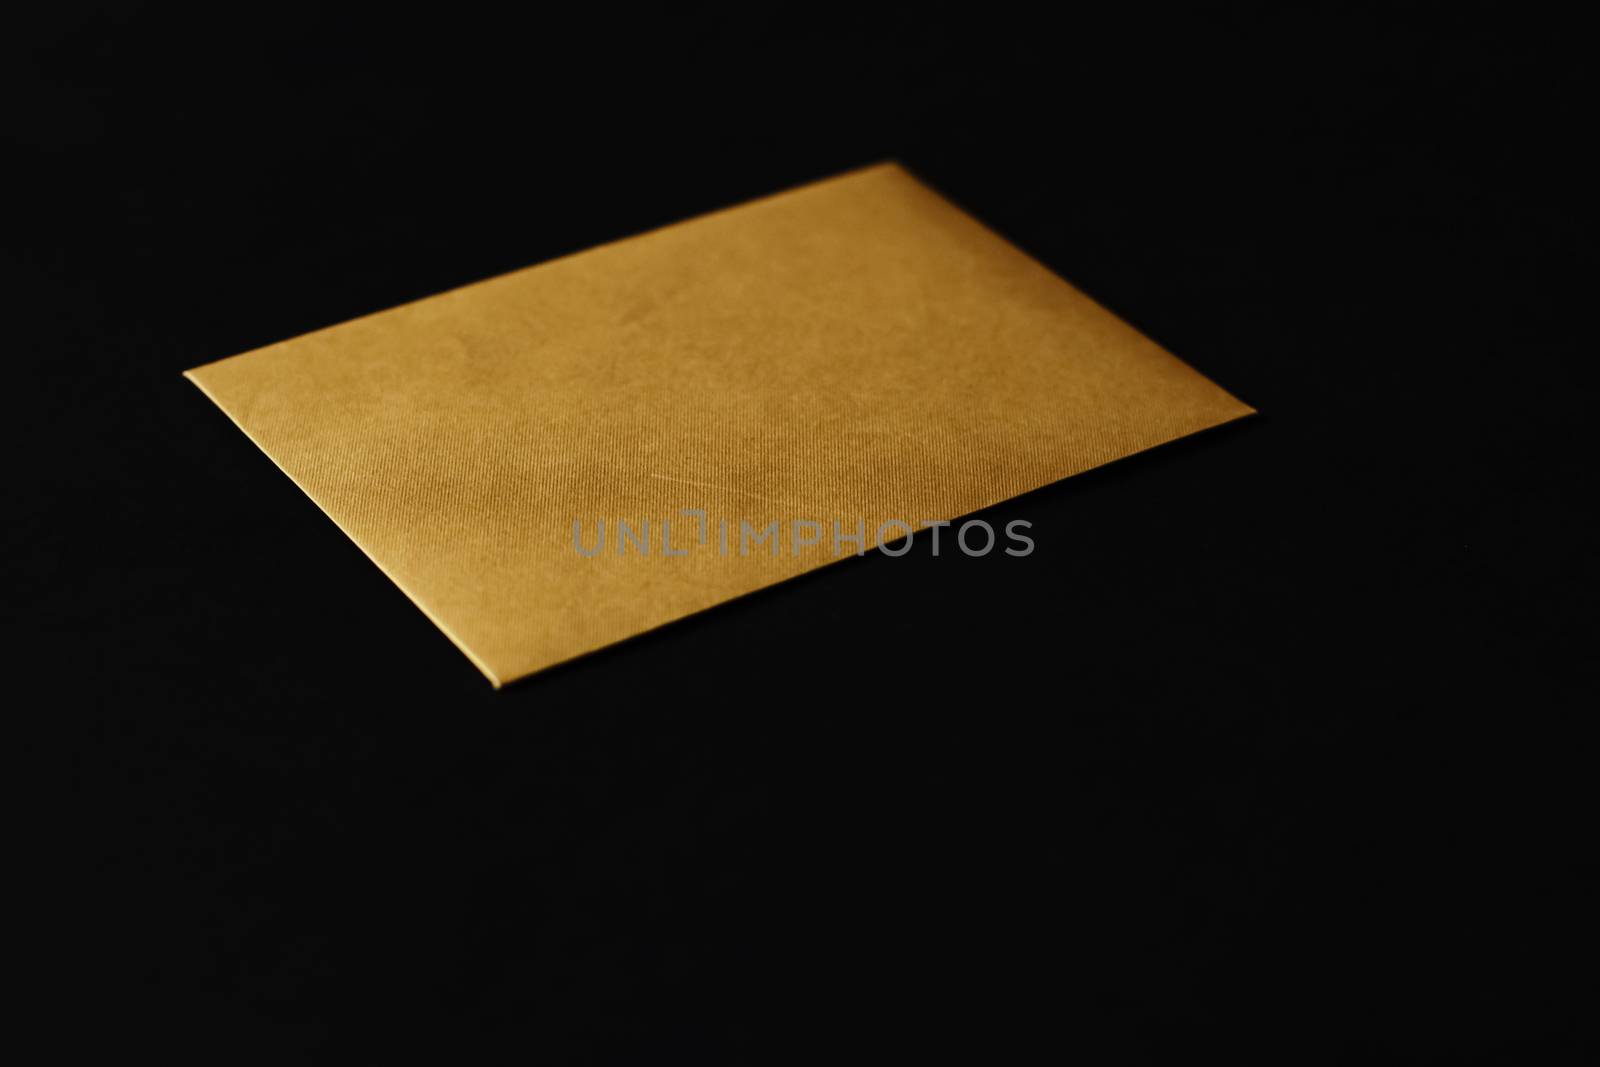 Blank golden paper card on black background, business and luxury brand identity mockup by Anneleven